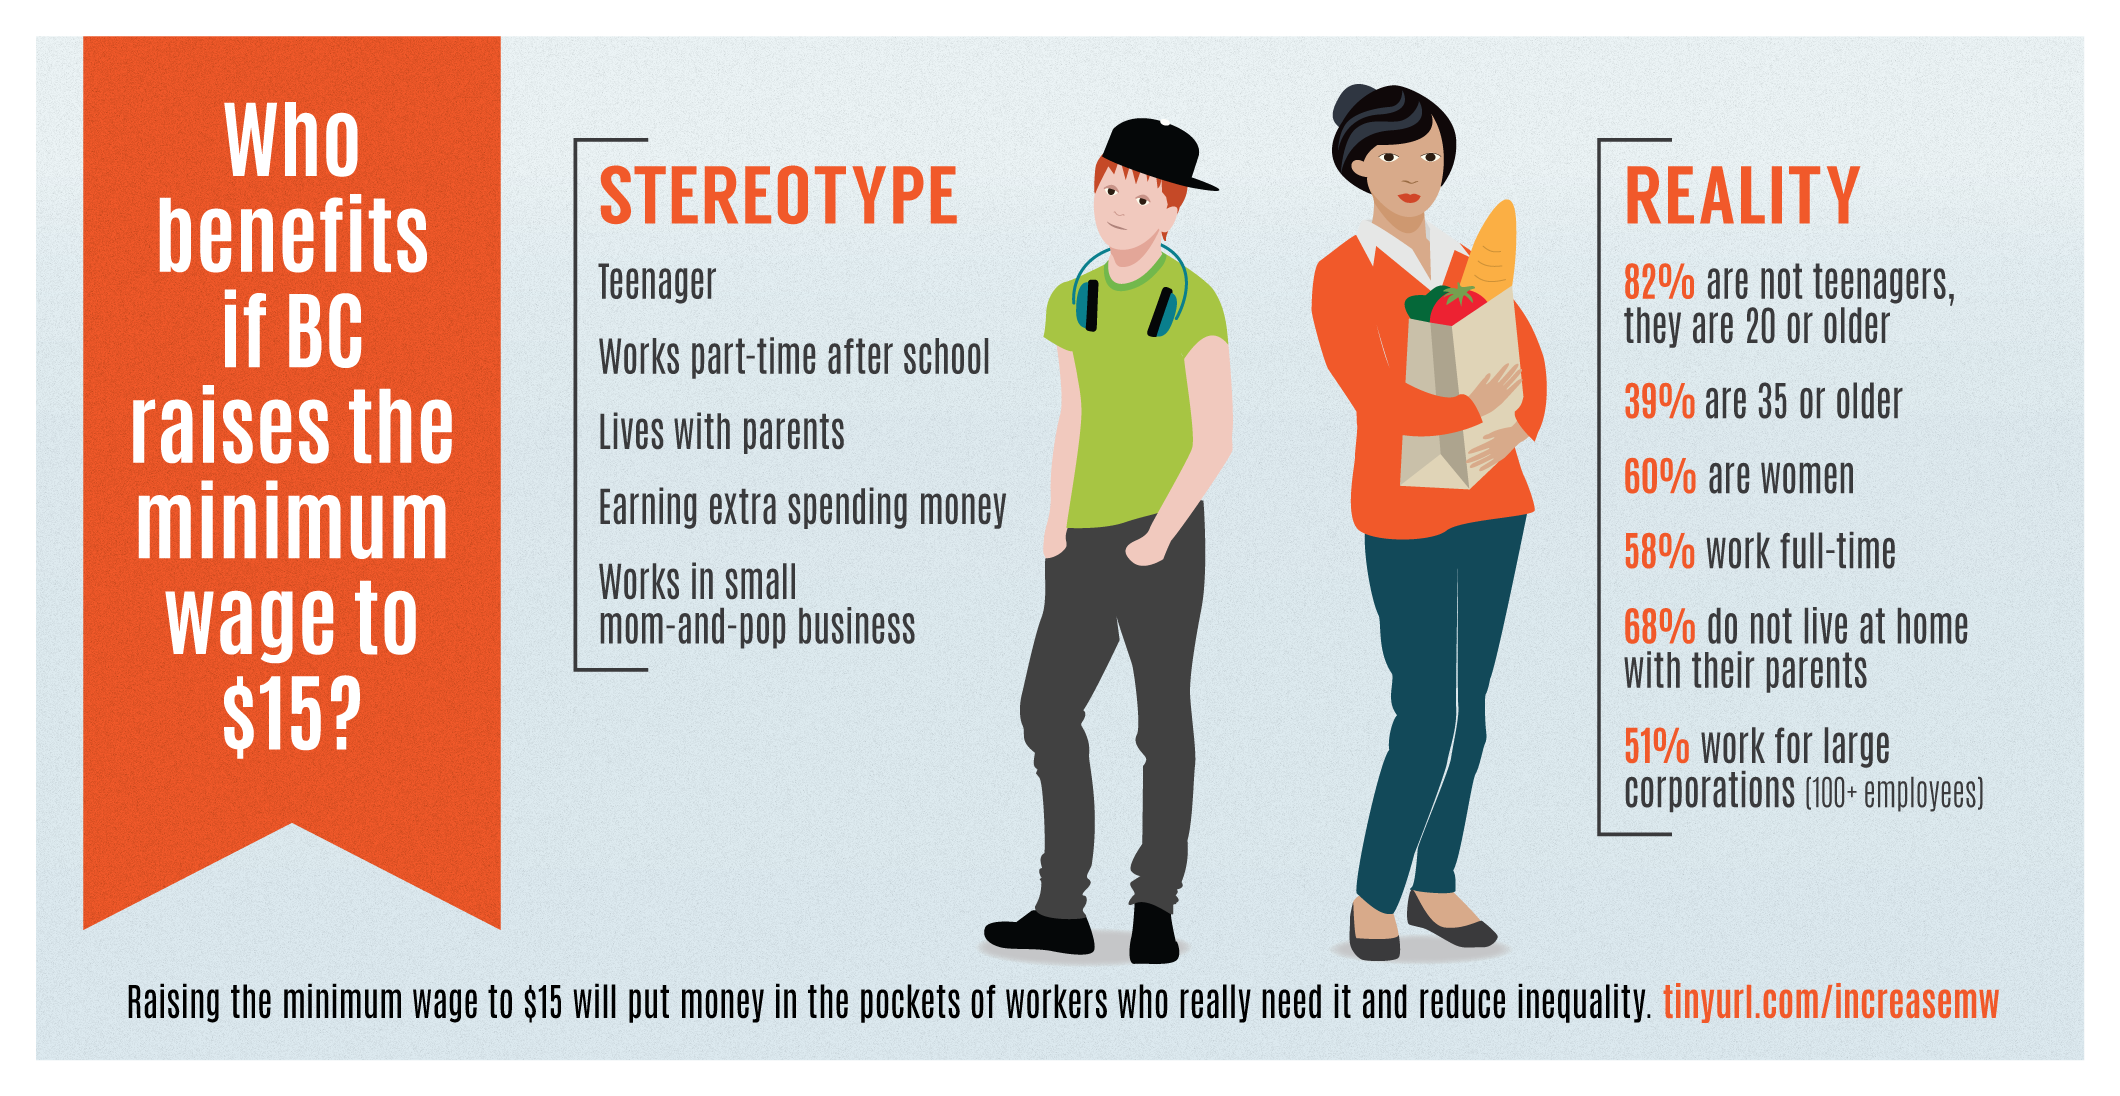 CCPA-BC Infographic: Who benefits from increasing the minimum wage?